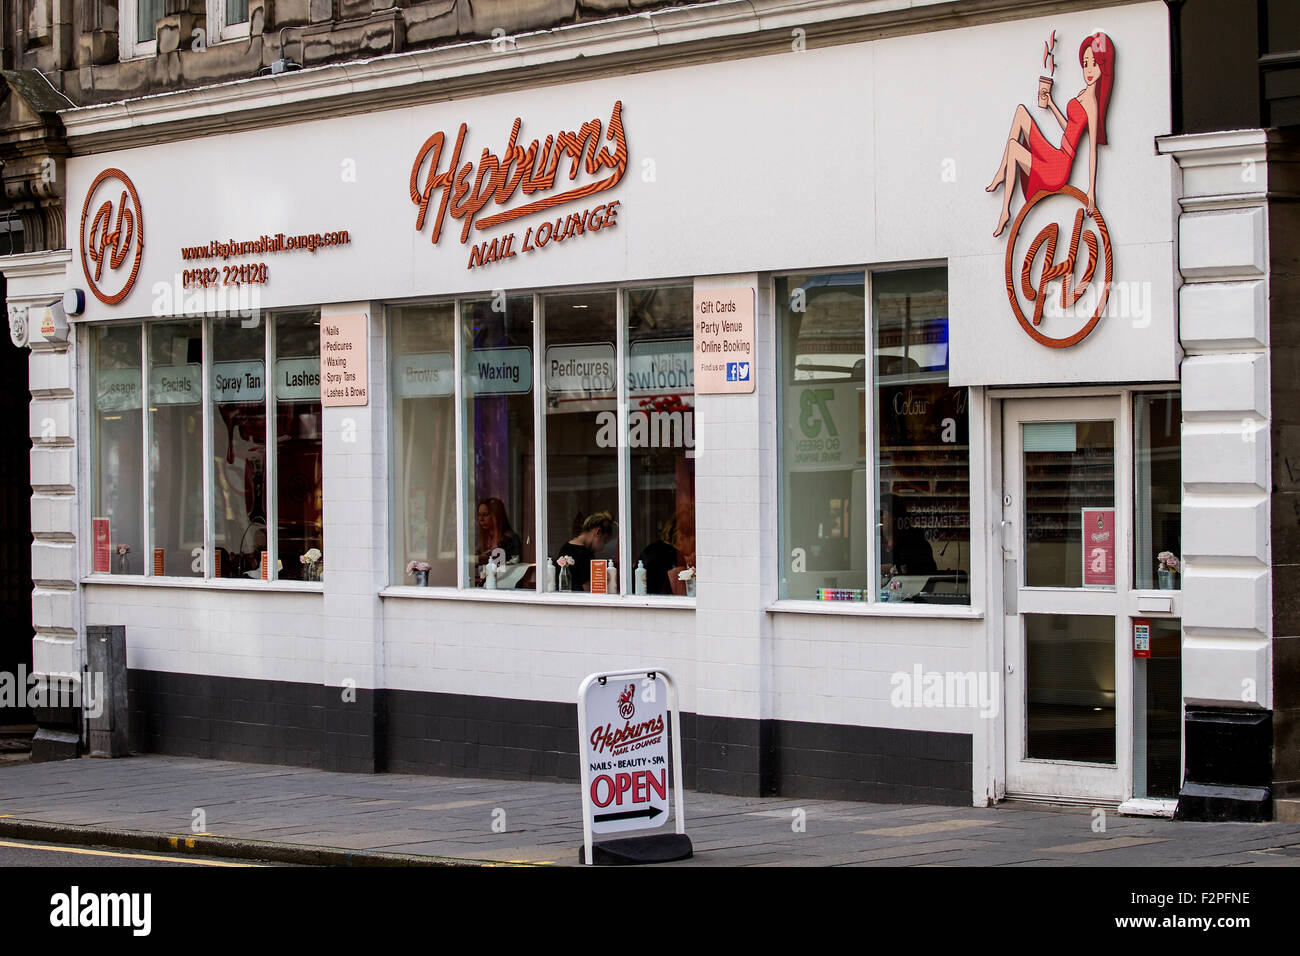 Hepburn’s Nail Lounge and Beauty Salon along 22 -24 Commercial Street Dundee, UK Stock Photo